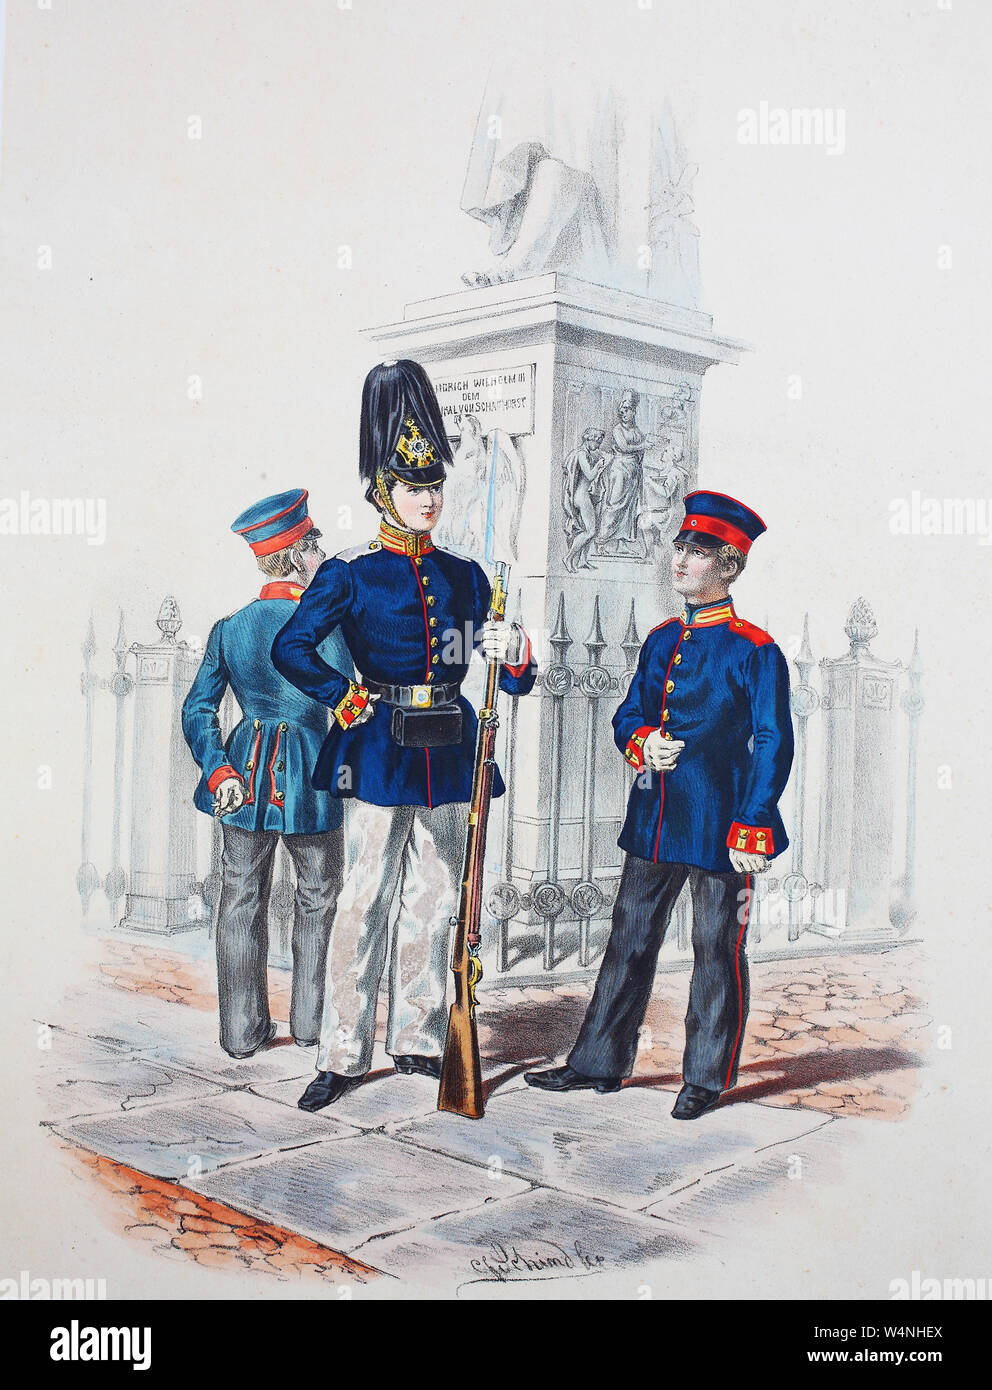 Royal Prussian Army, Guards Corps, Preußens Heer, preussische Garde, Kadetten-Corps, Kadett vom Kulmer Corps, Kadett vom Berliner Corps, Kadett vom Potsdamer Corps, Digital improved reproduction of an illustration from the 19th century Stock Photo